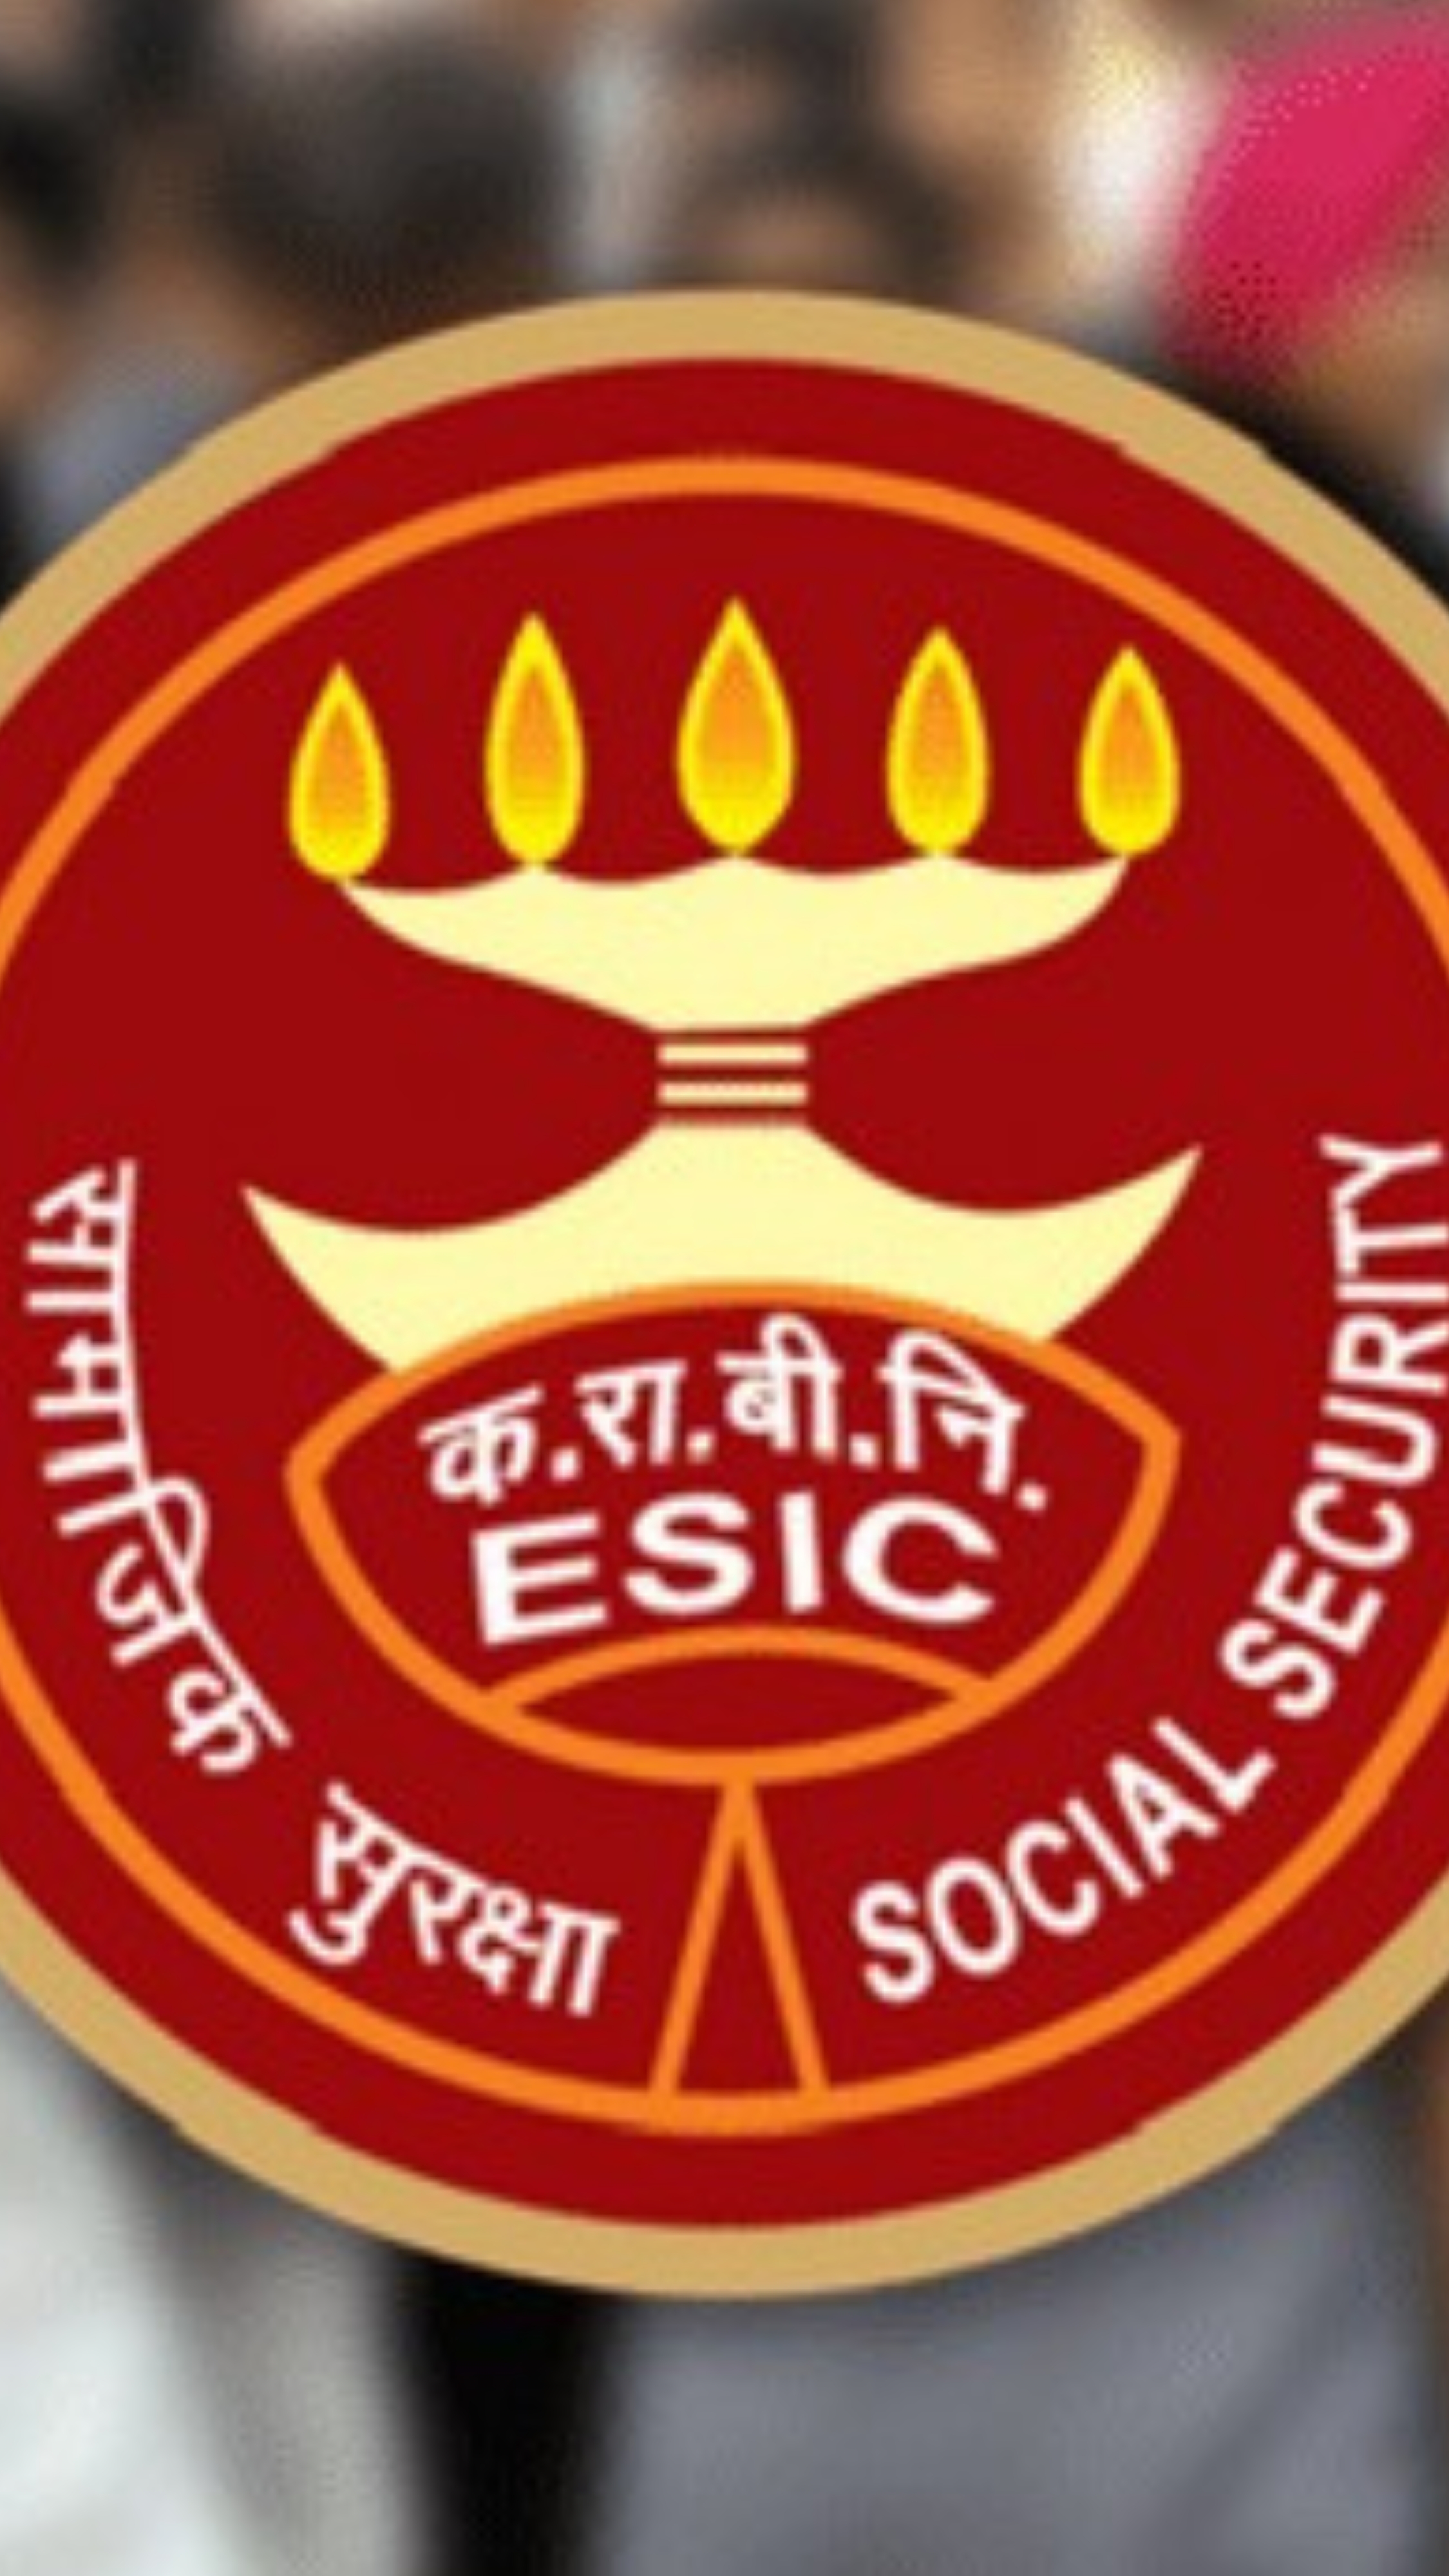 The benefits of ESI Scheme extended to 52 transgender employees